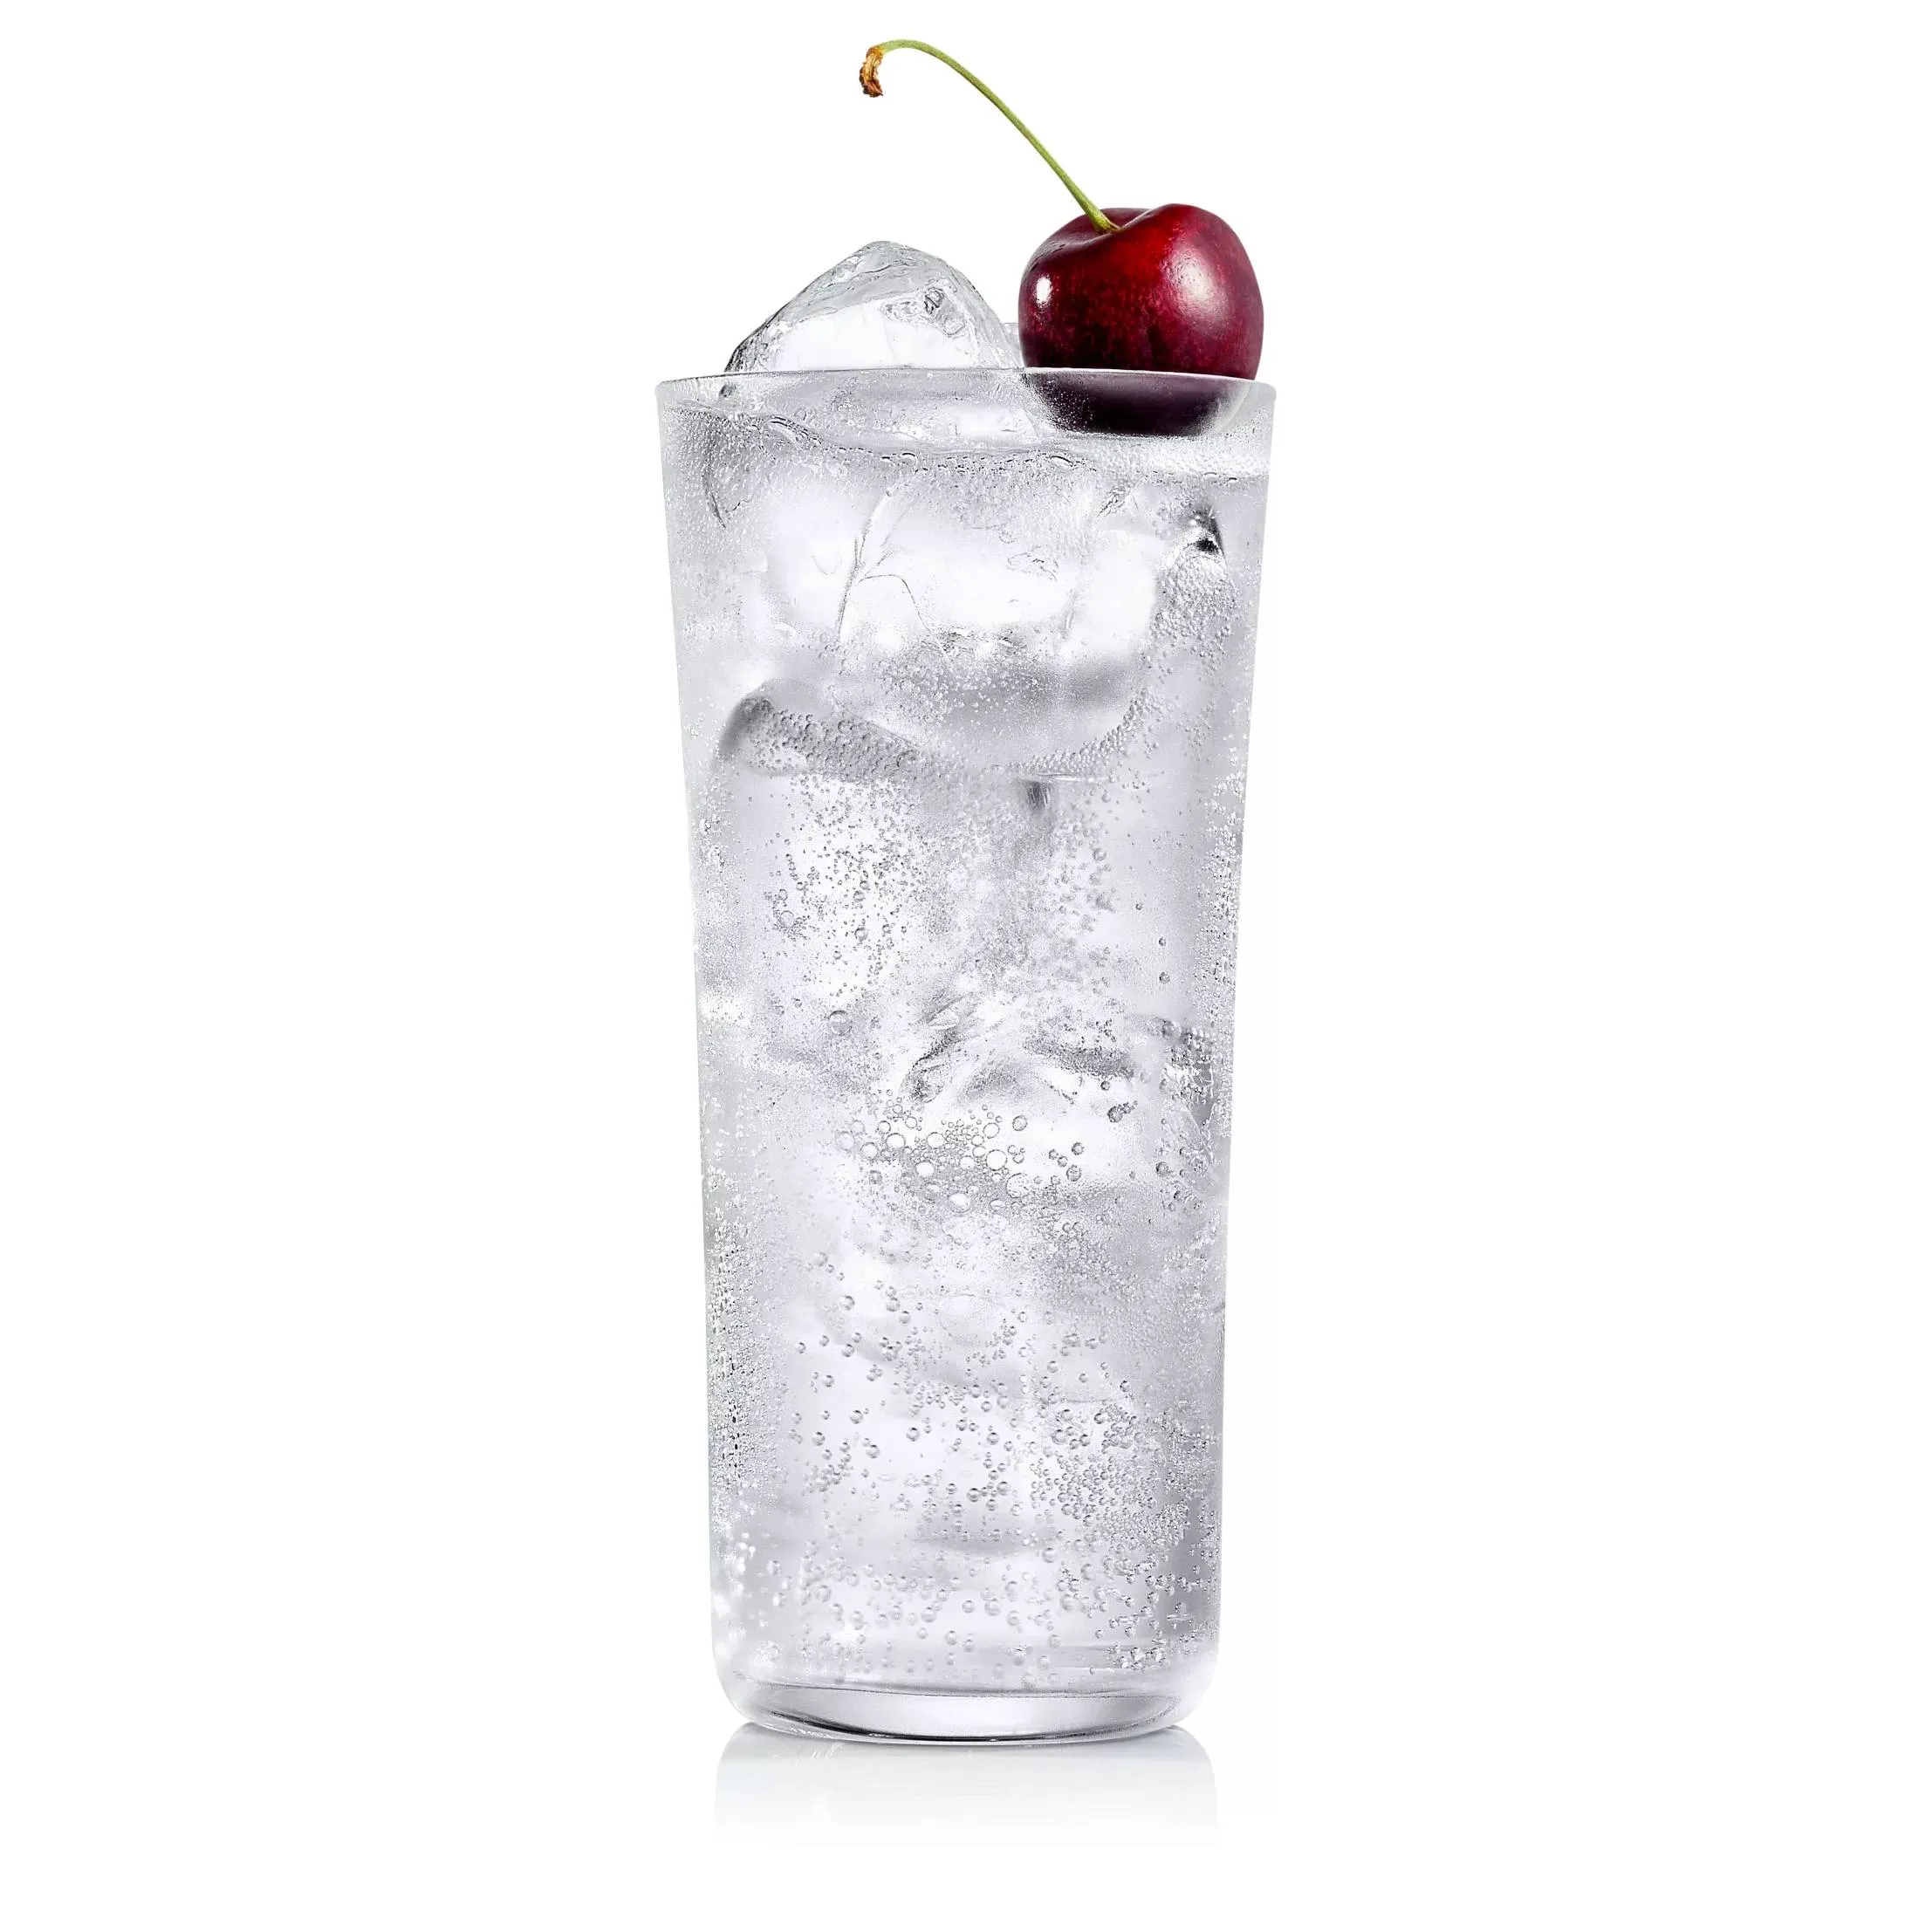 Cocktail shot of Roku gin and tonic with cherry garnish